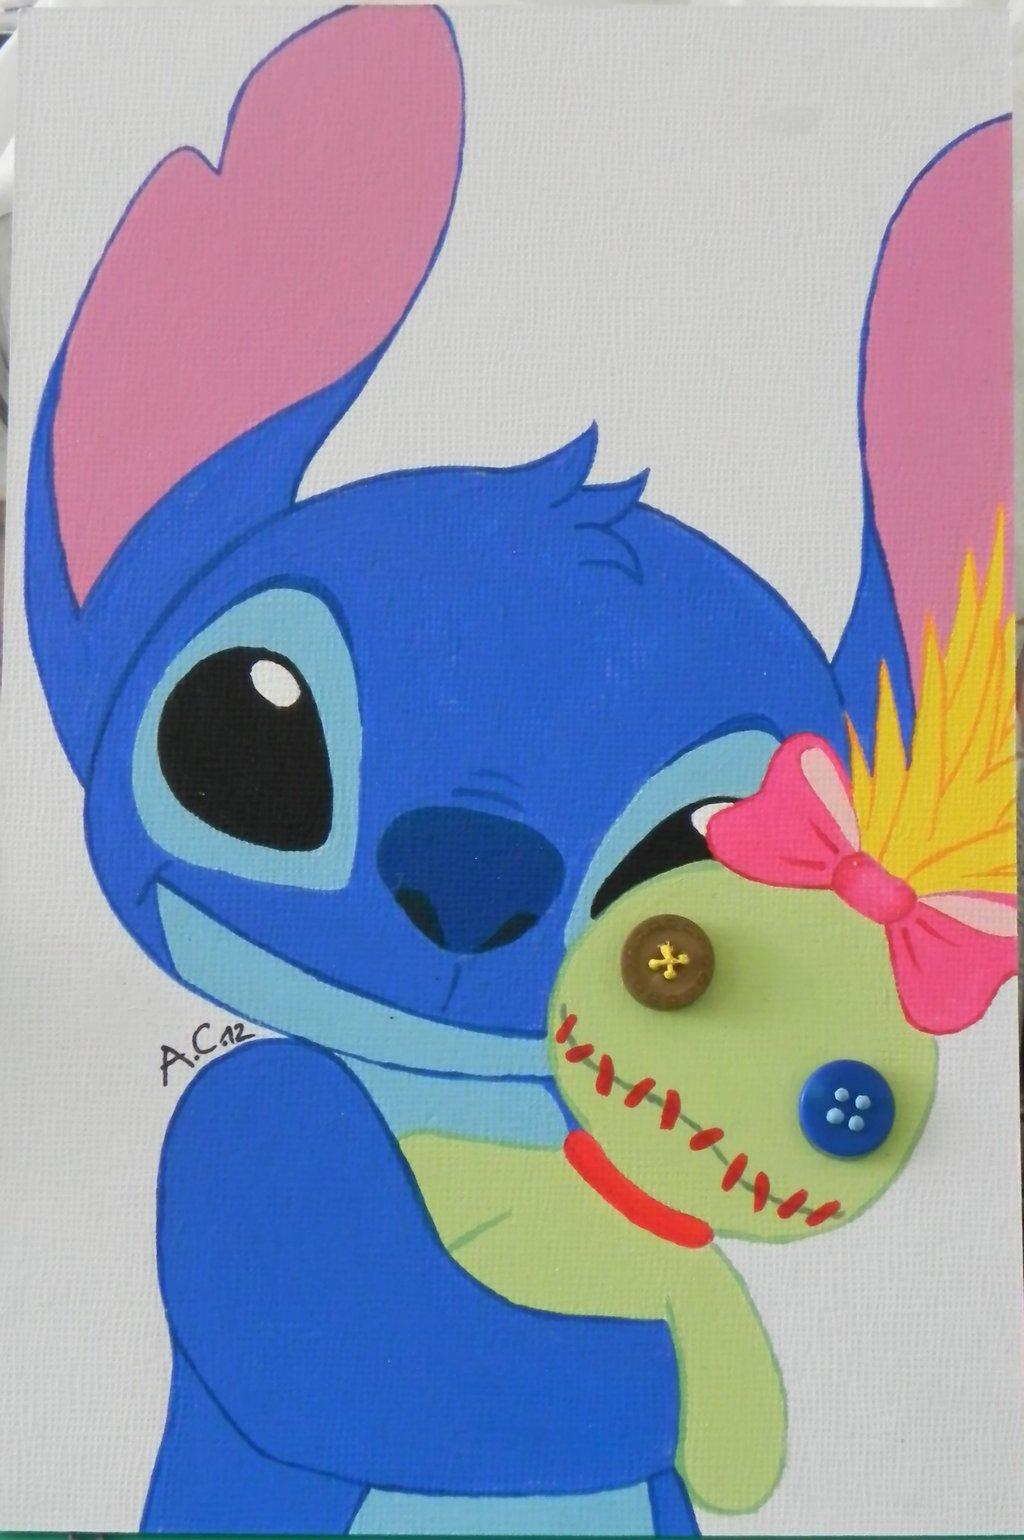 Stitch And Toothless Wallpaper